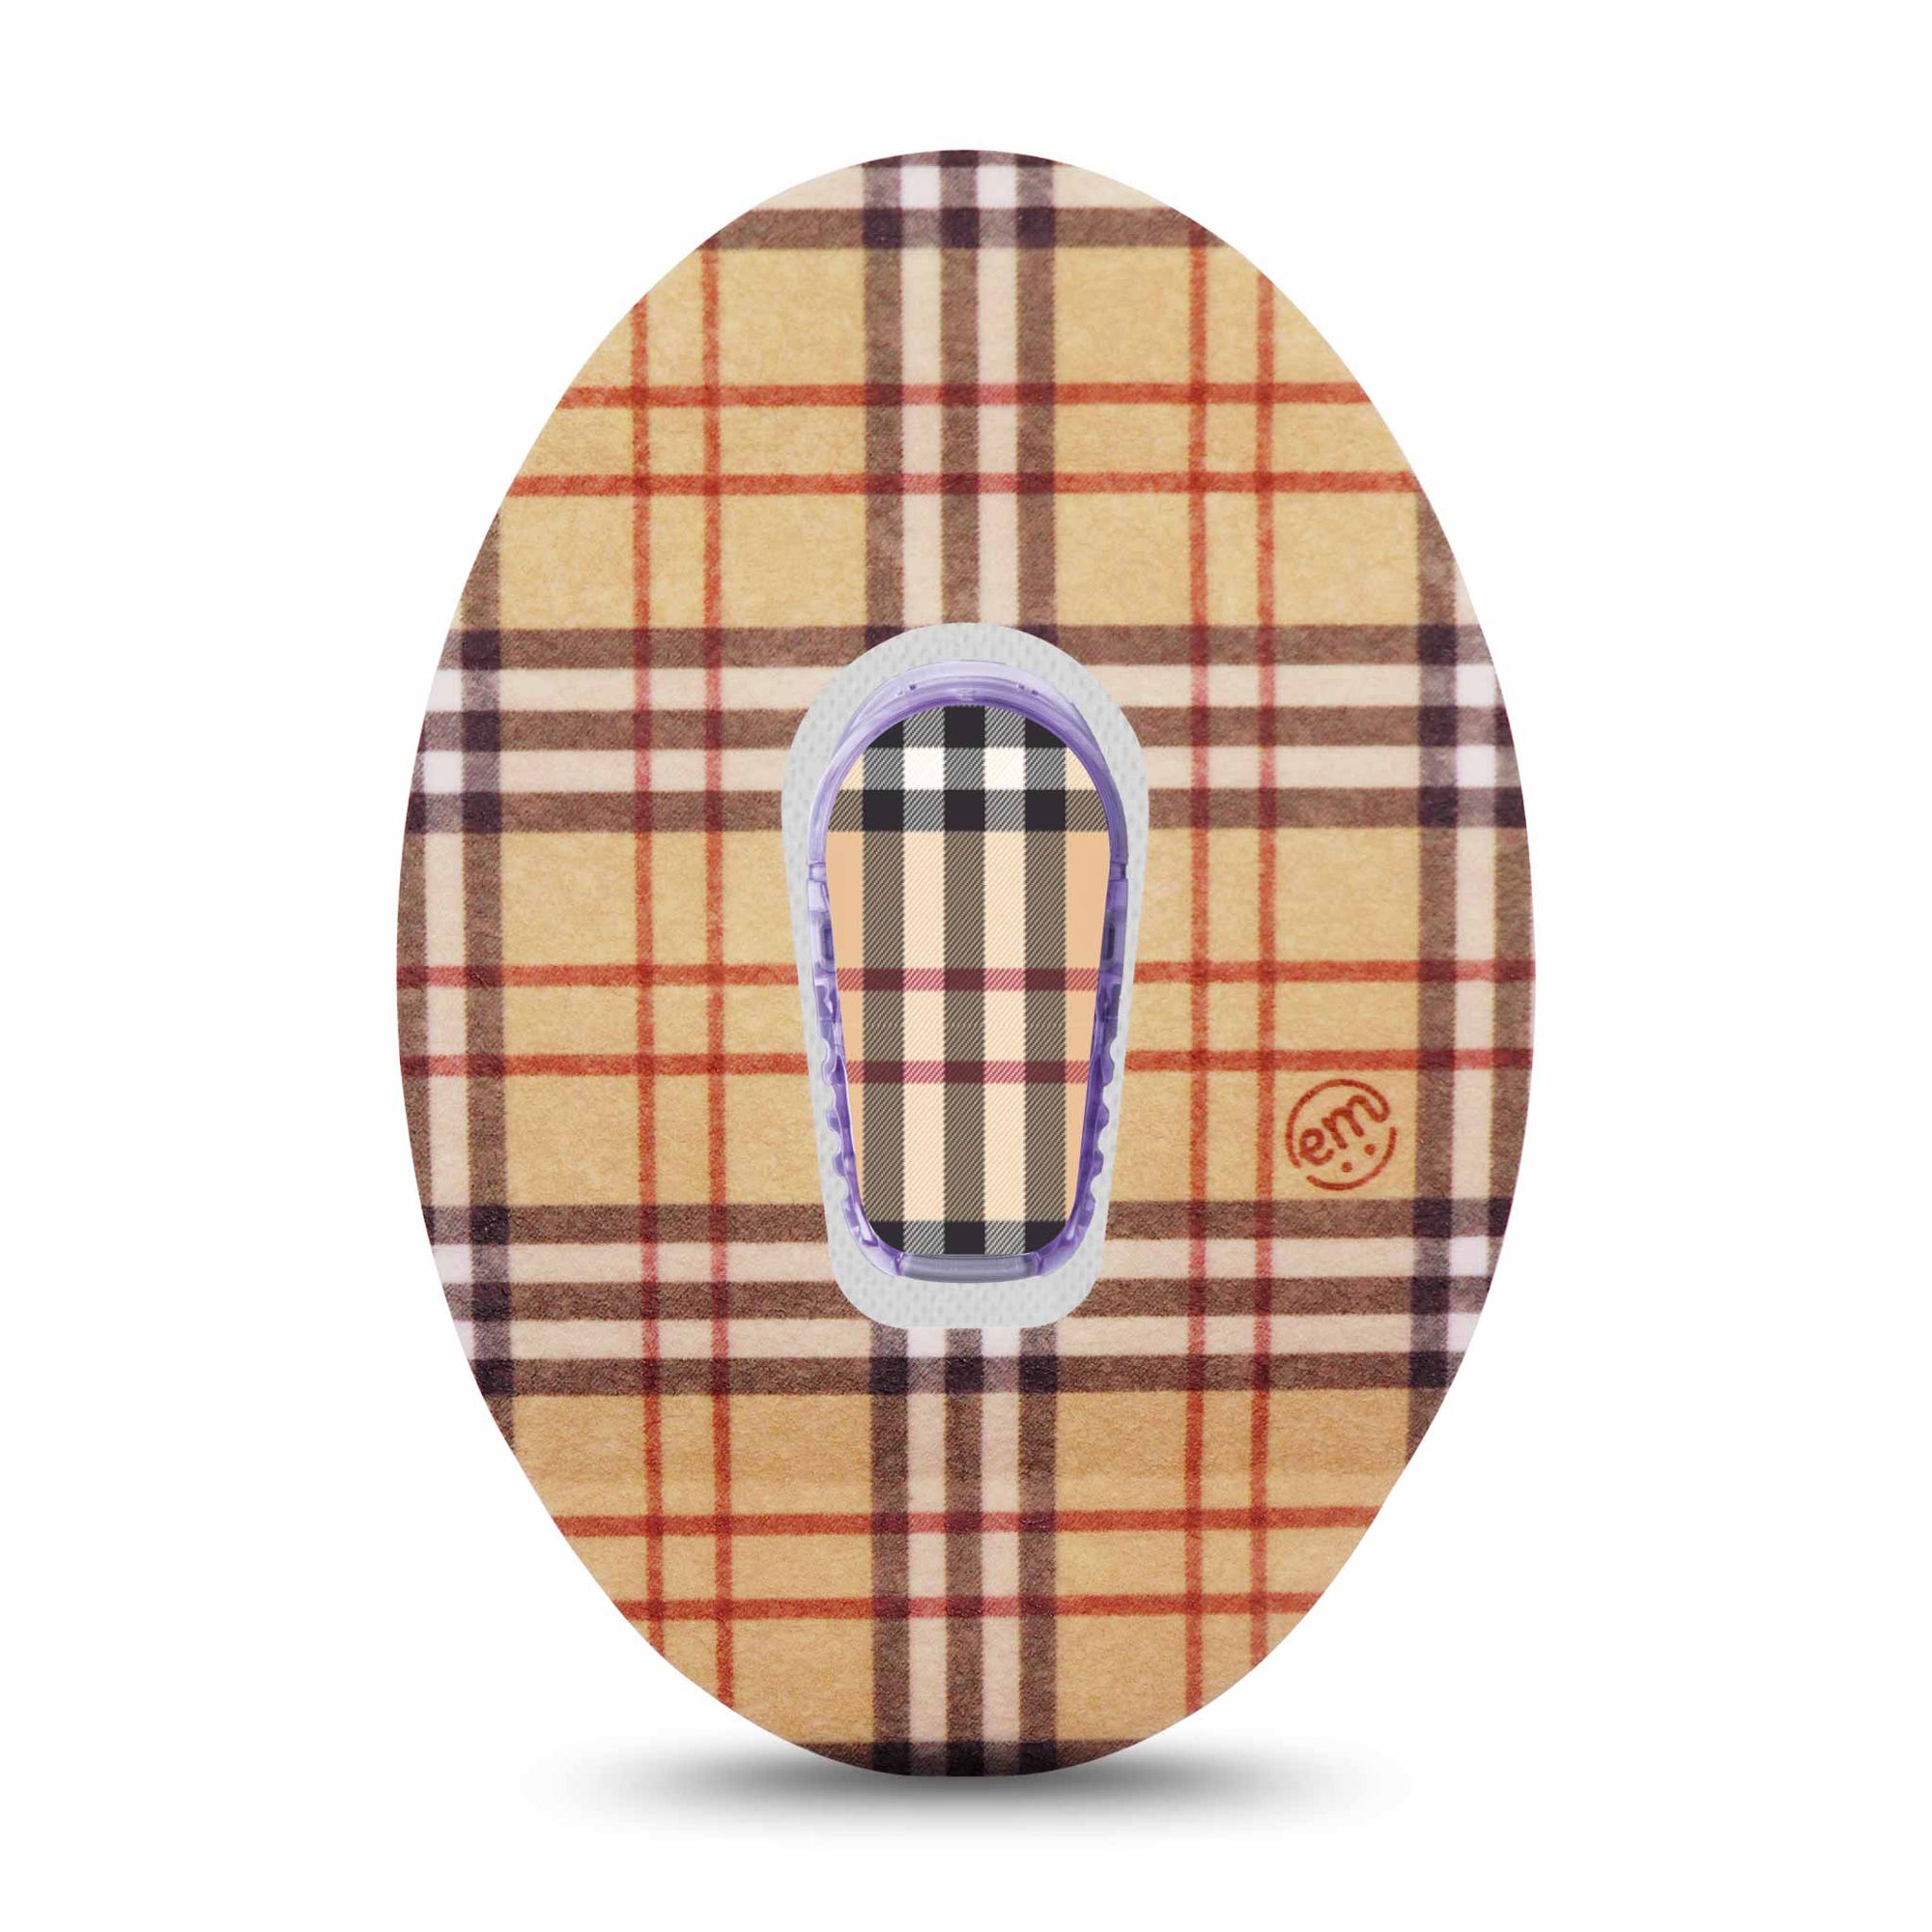 ExpressionMed Plaid and Bougie Dexcom G6 Transmitter Sticker with Tape